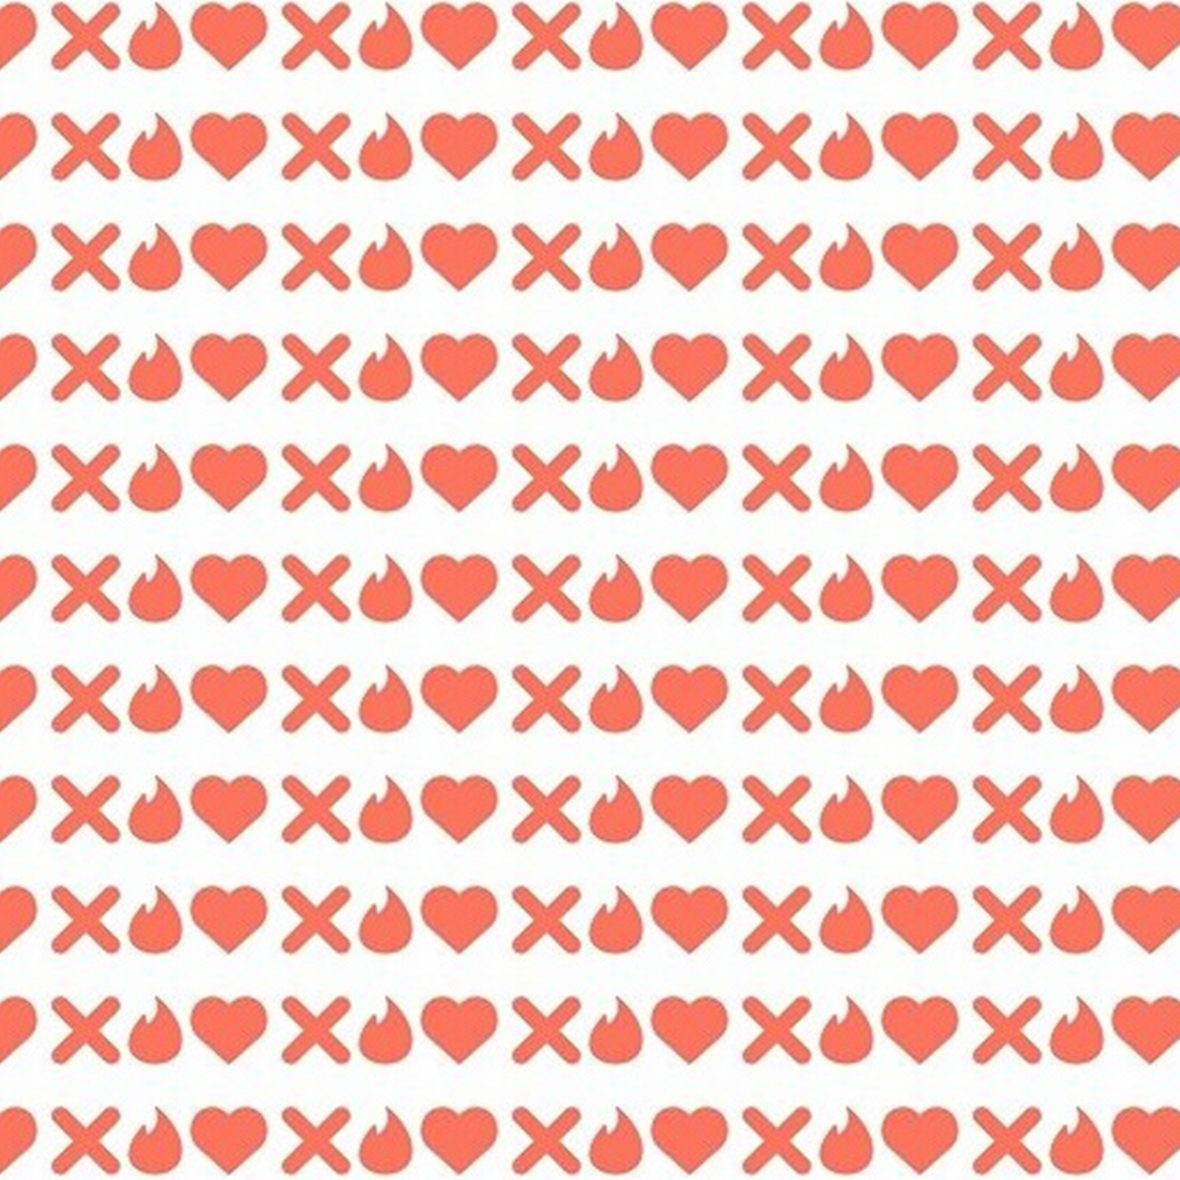 White background with orange x's, hearts and tinder logos.